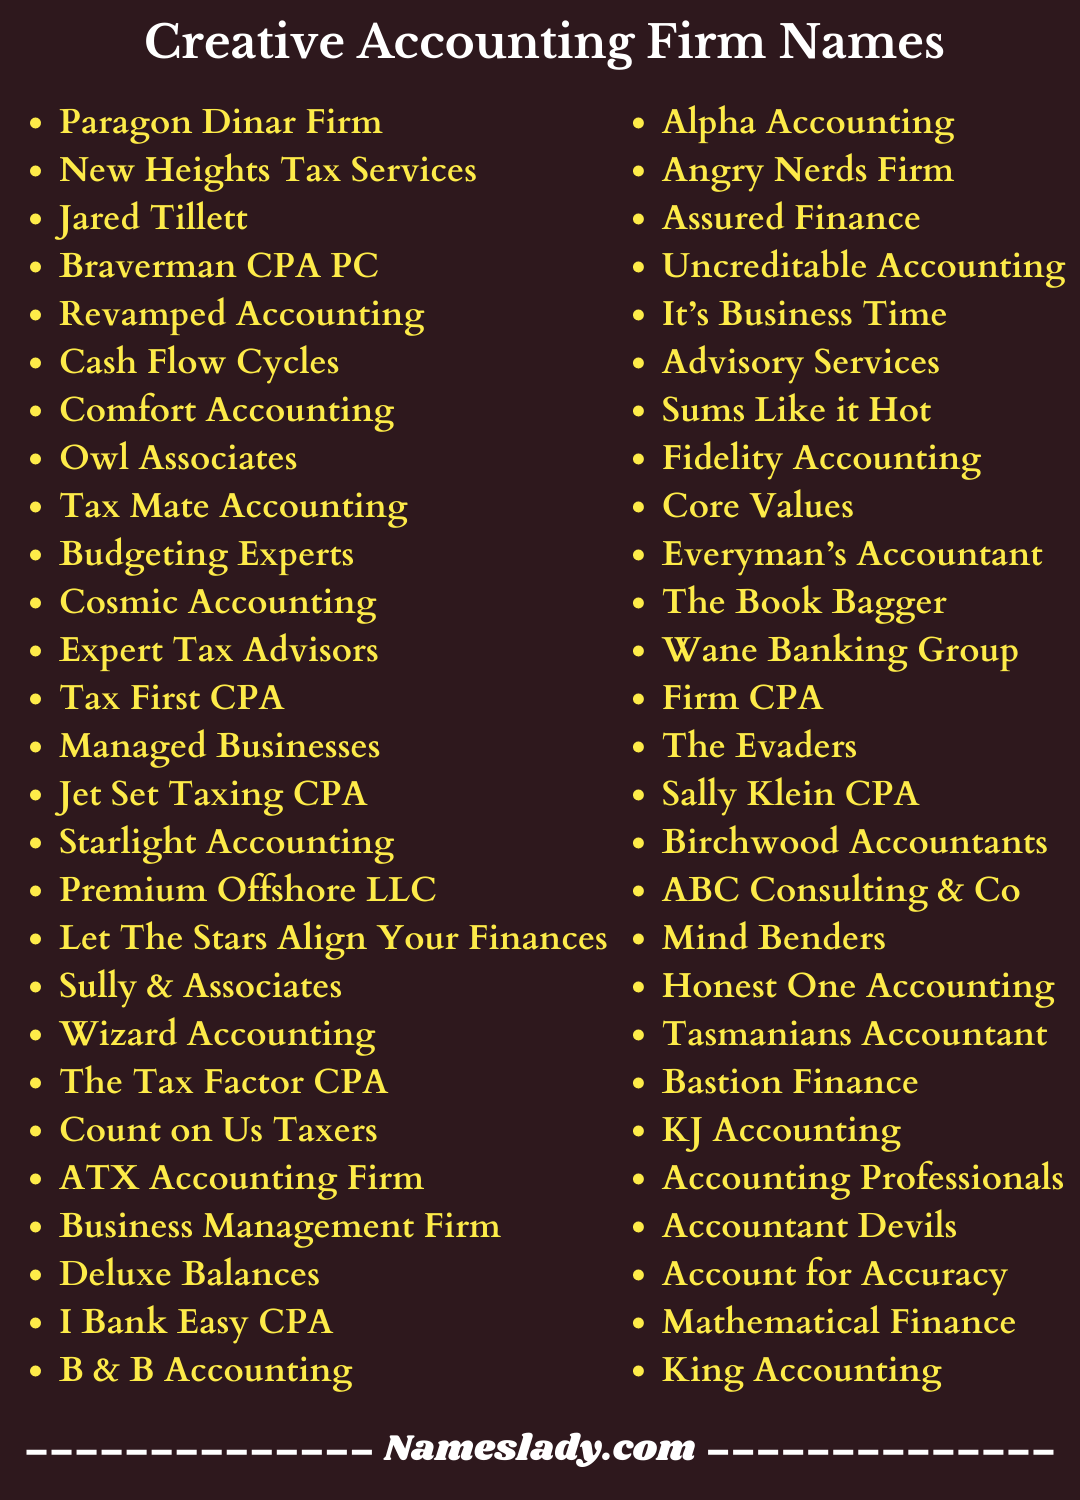 Creative Accounting Firm Names